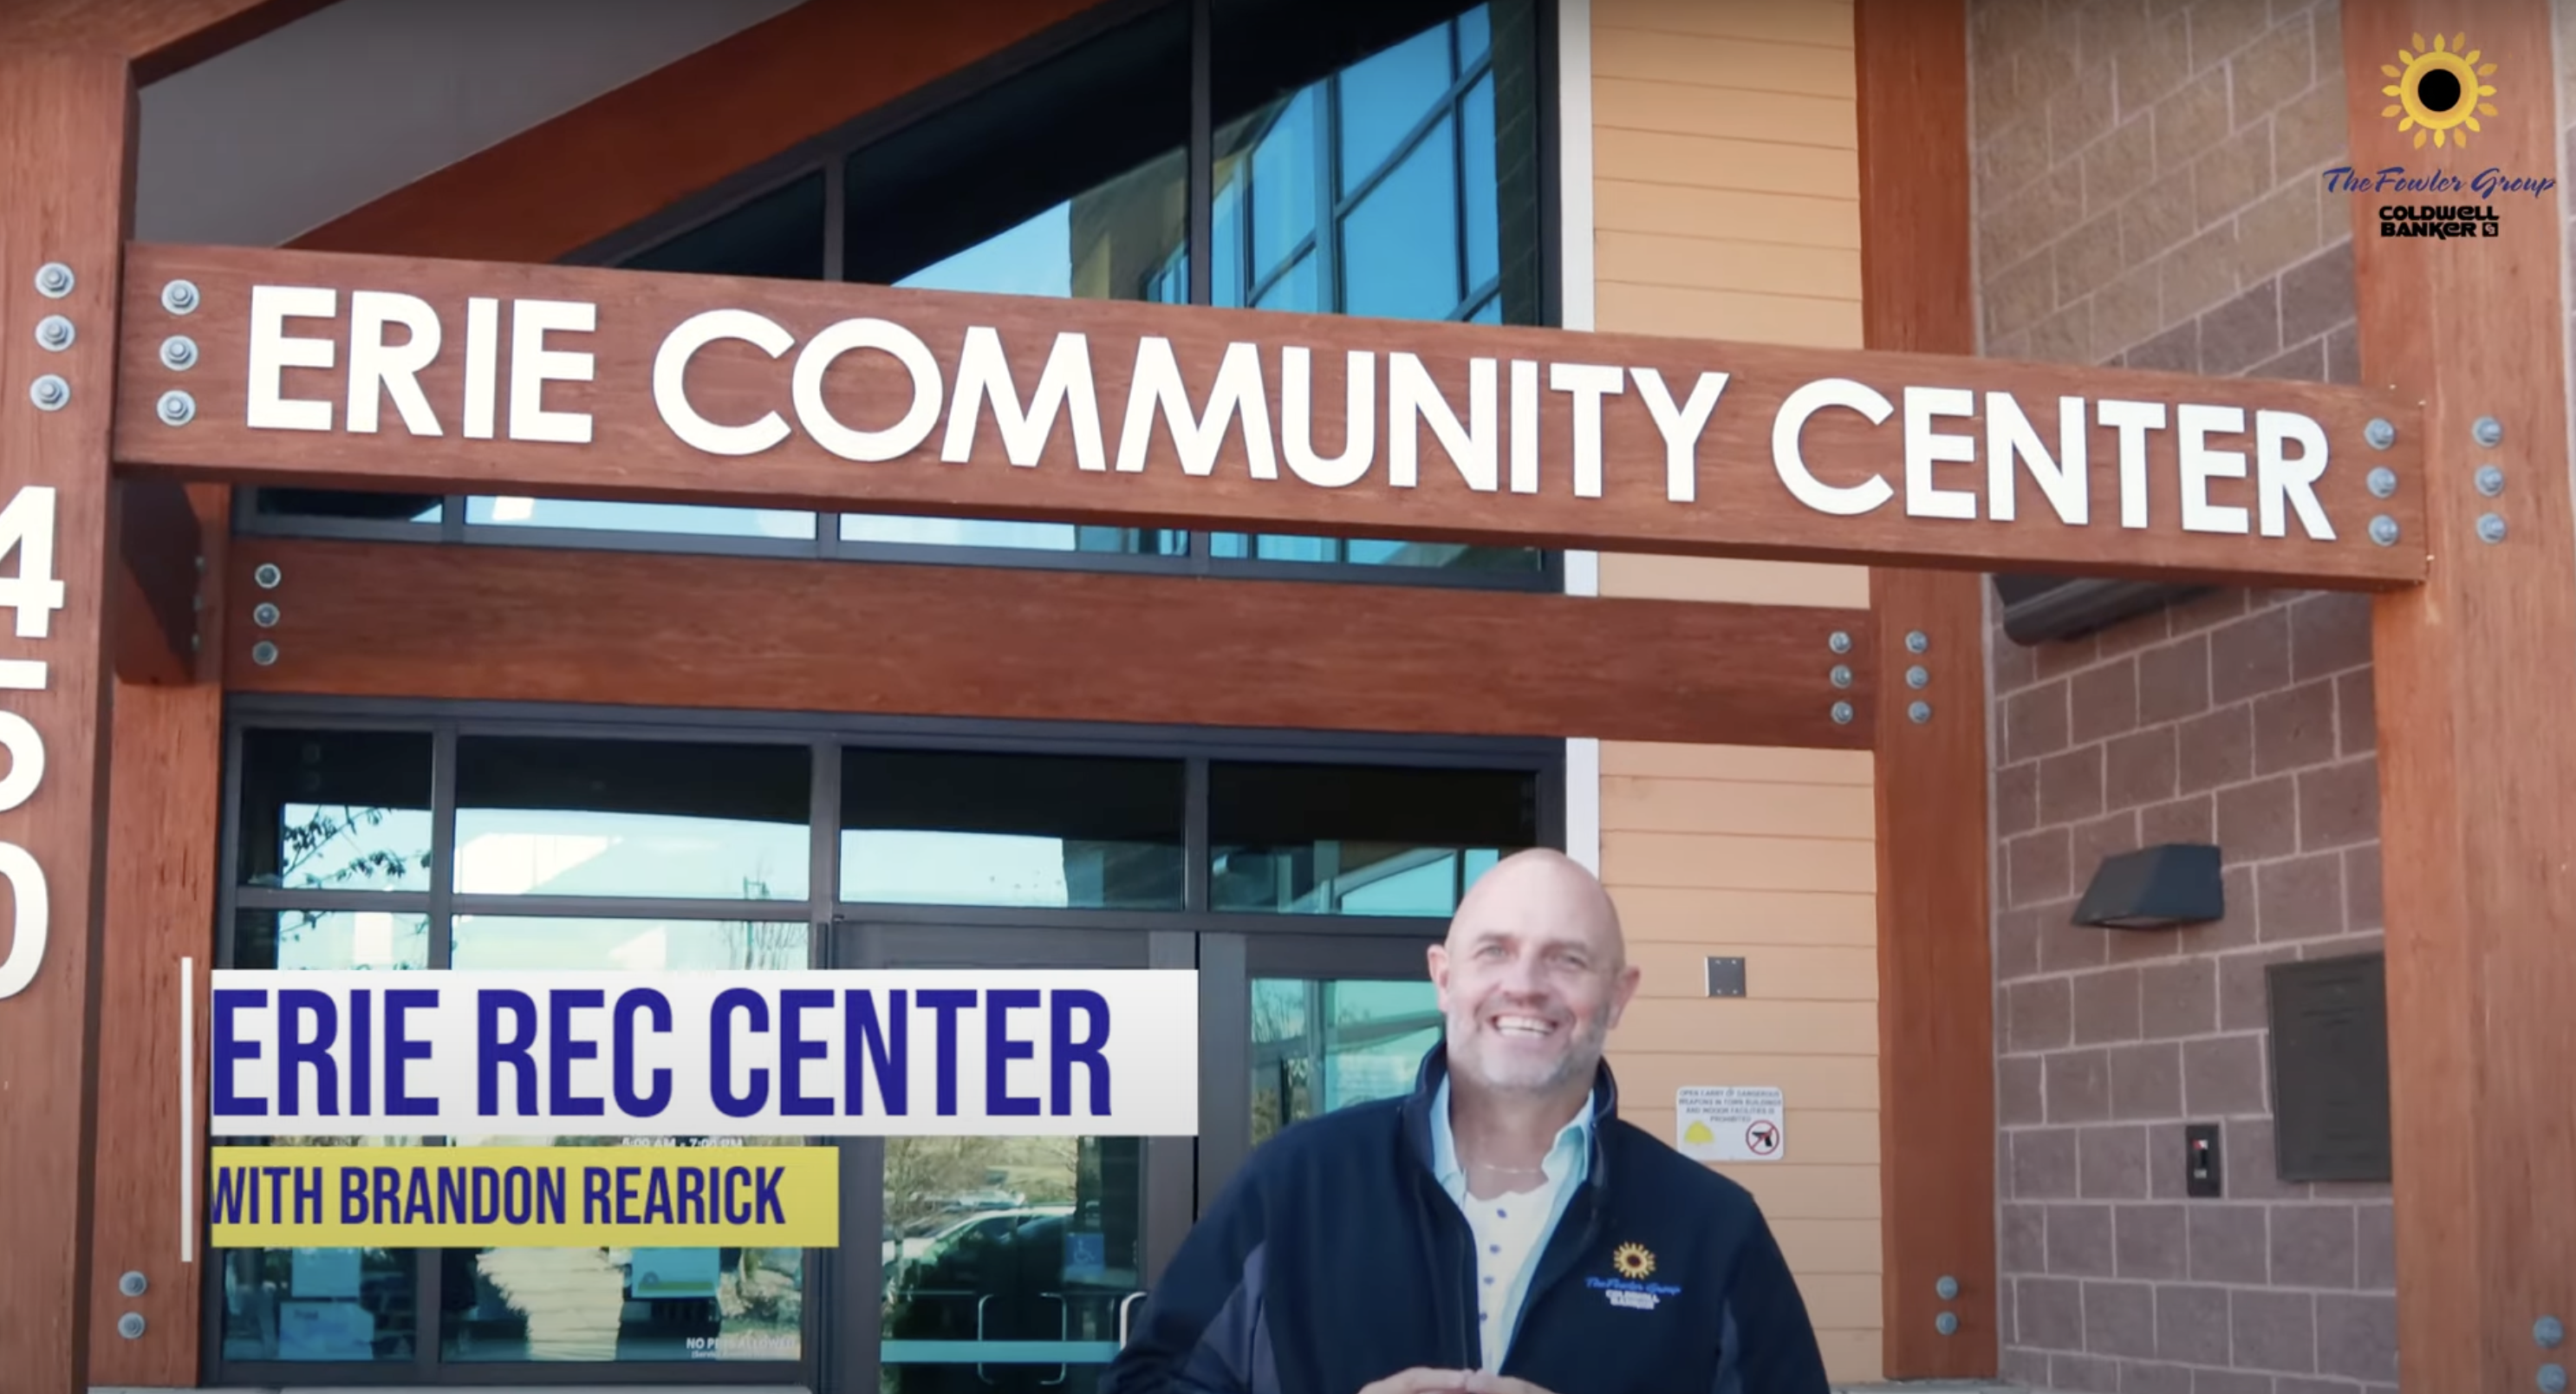 Experience Erie with Erie Community Center